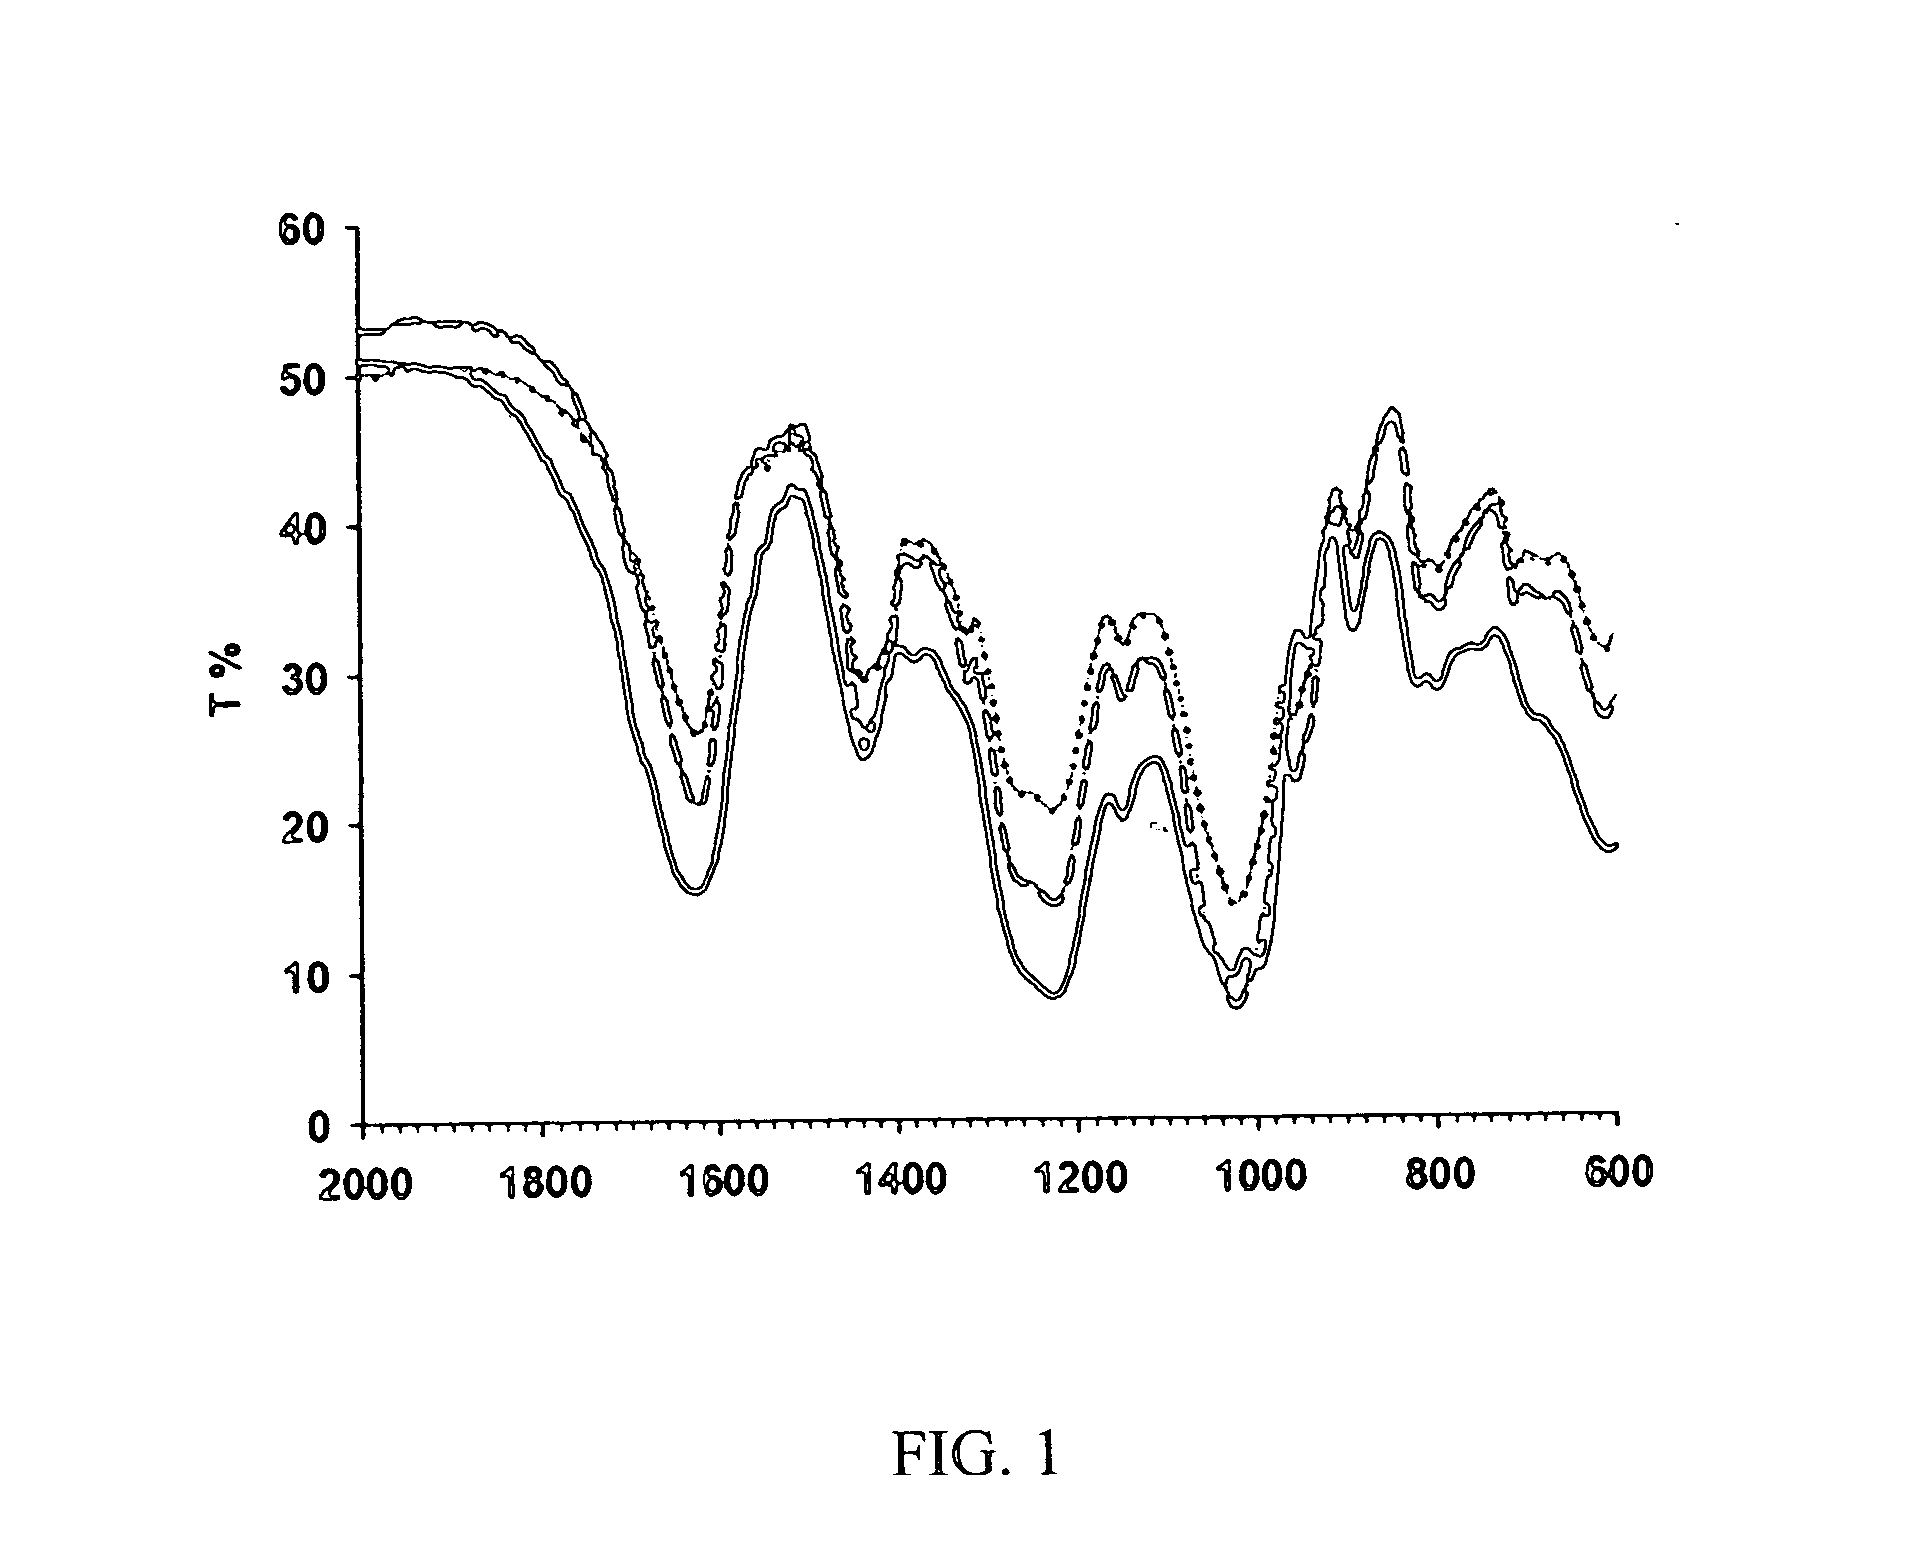 Drug formulation containing a solubilizer for enhancing solubility, absorption, and permeability